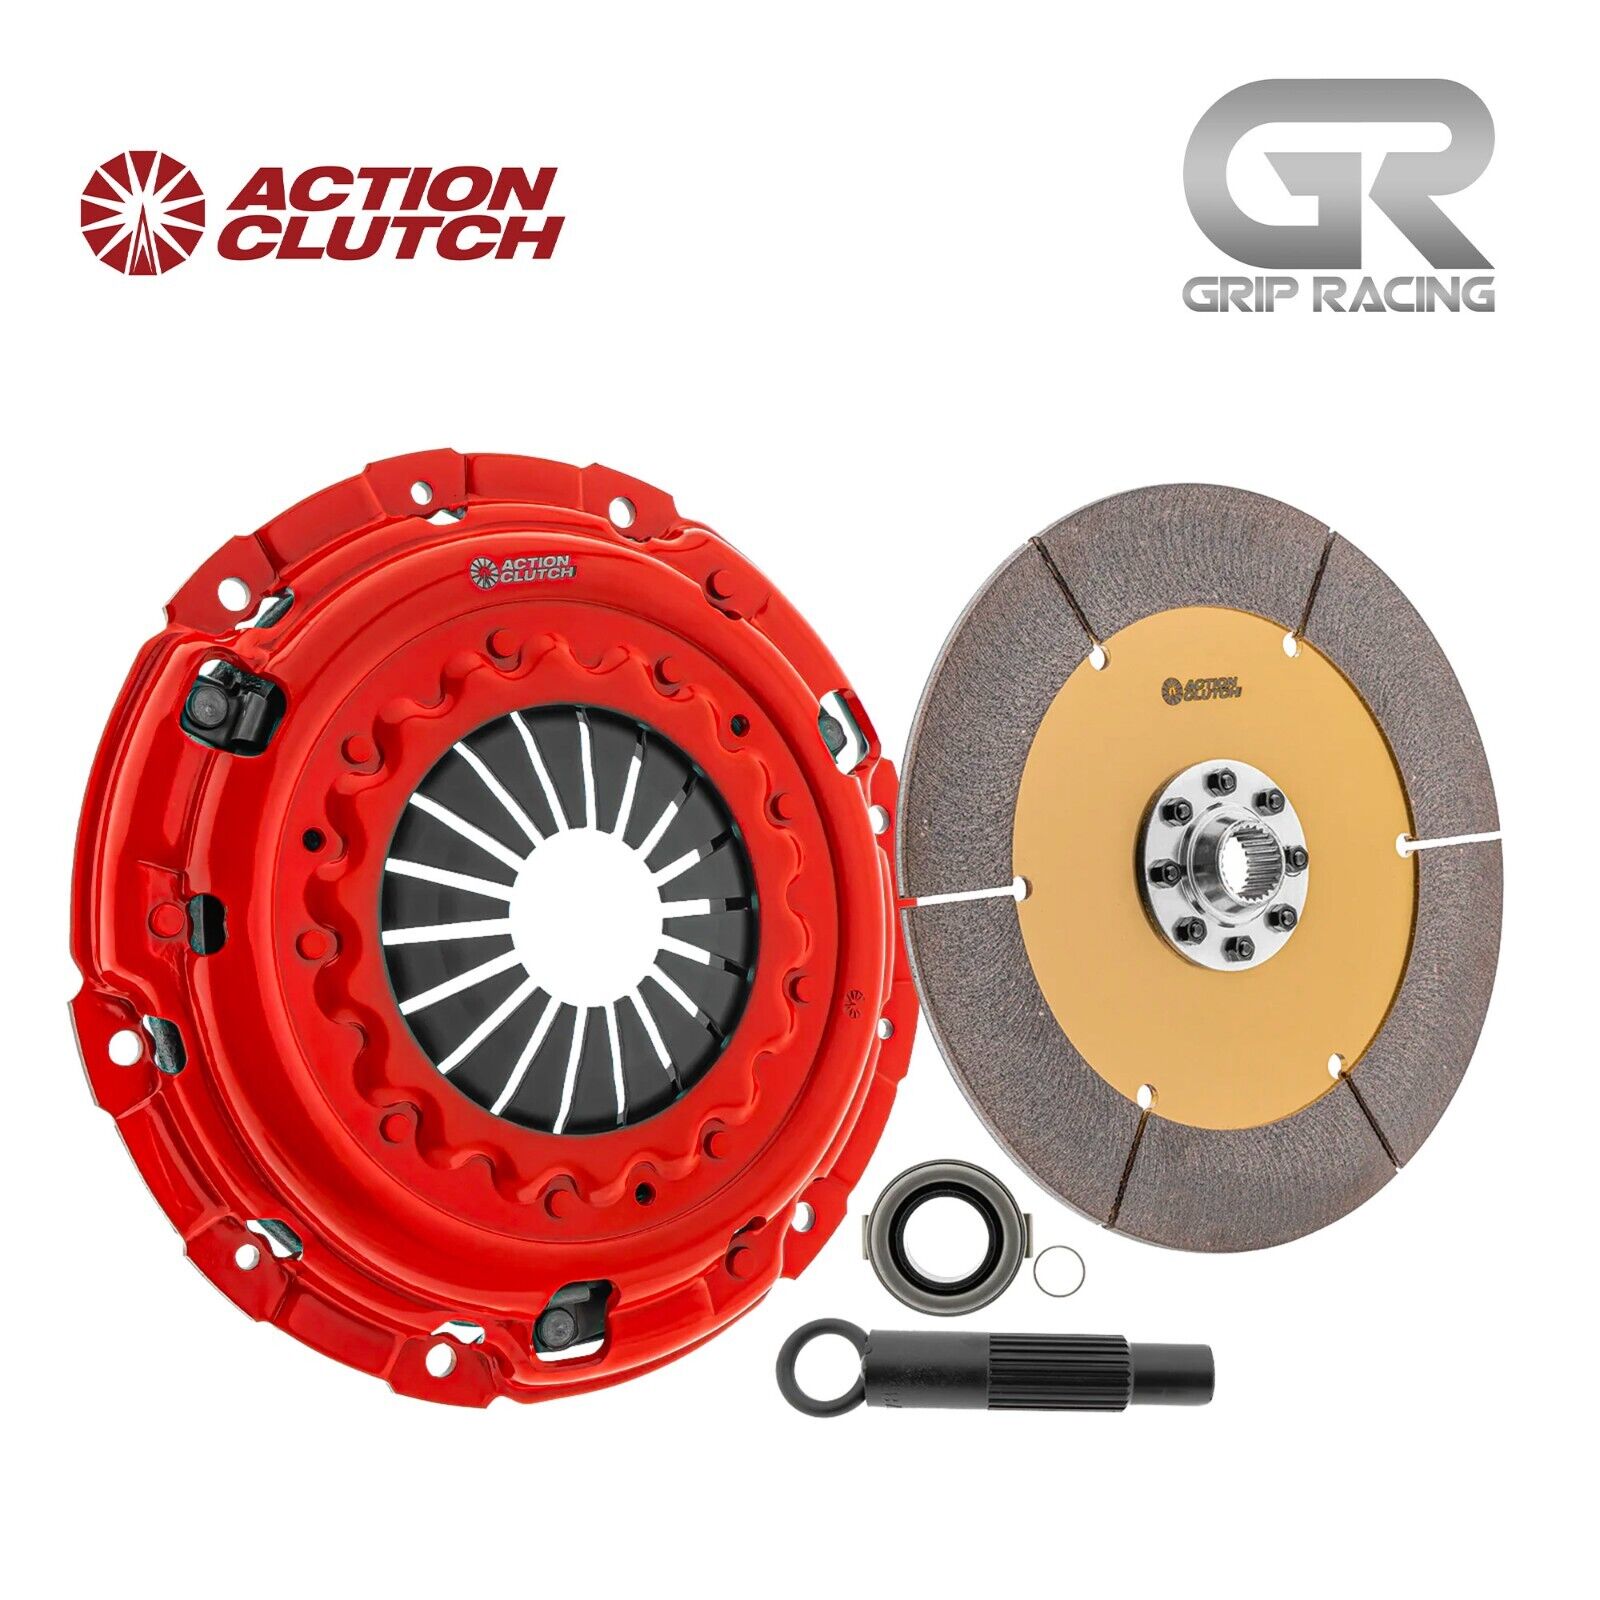 AC Ironman Unsprung Clutch Kit For Toyota Corolla 1998-08 1.8L DOHC (1ZZFE) FWD